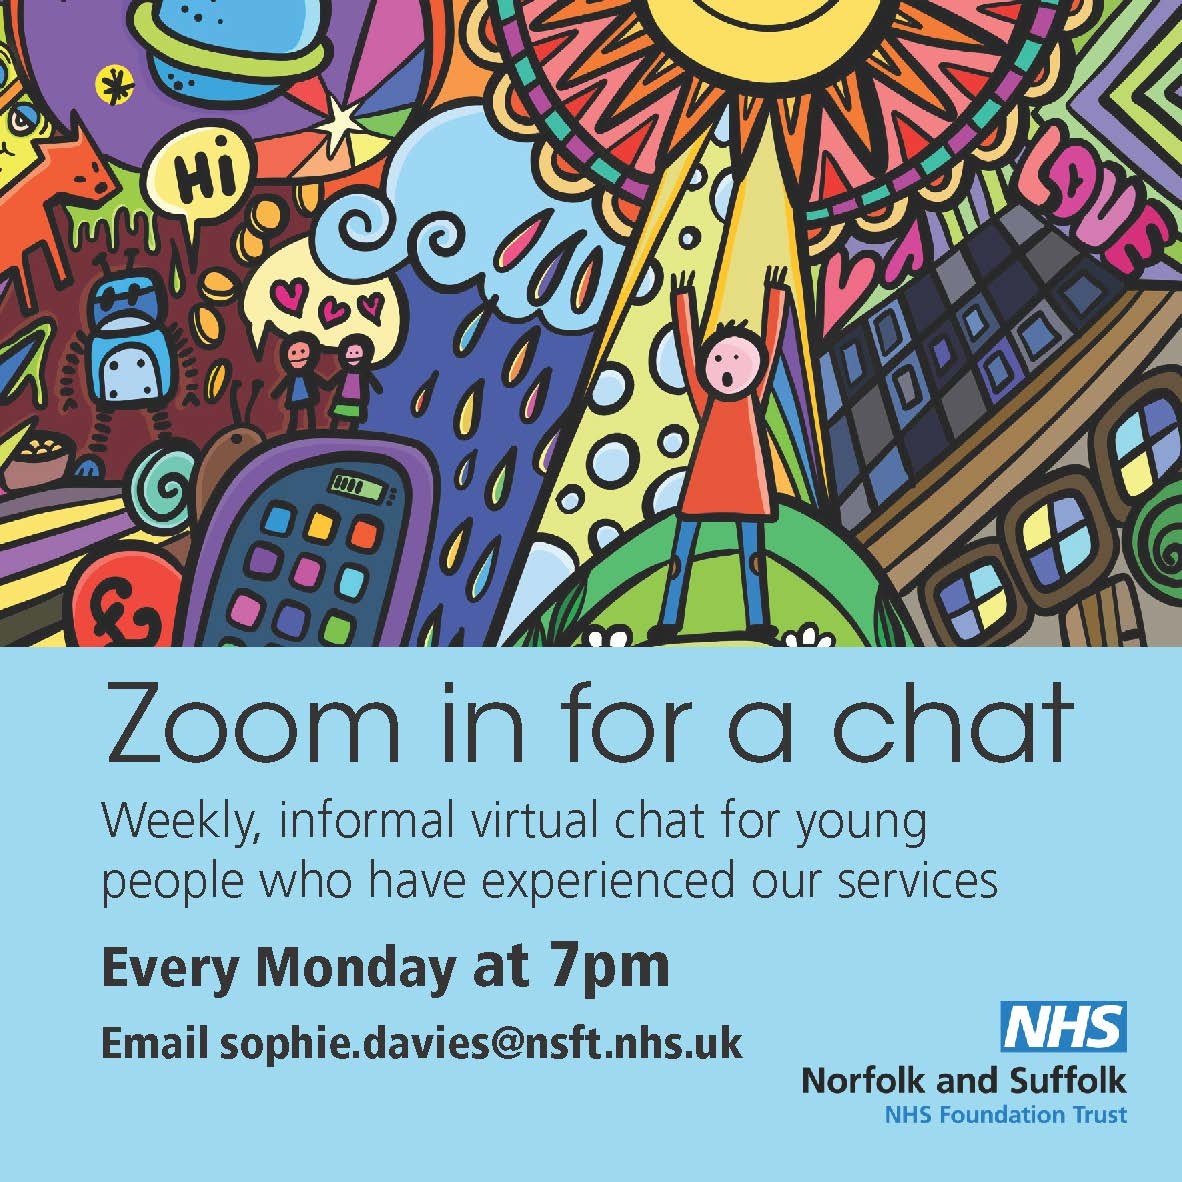 'Share how you are feeling with others. There’s a good chance they are also feeling the same way.' Every Monday from 7pm join other young people from across #Norfolk and #Suffolk for a chat. You are not alone. #WorkingTogetherForBetterMentalHealth @youth_NSFT @NorfolkCYP